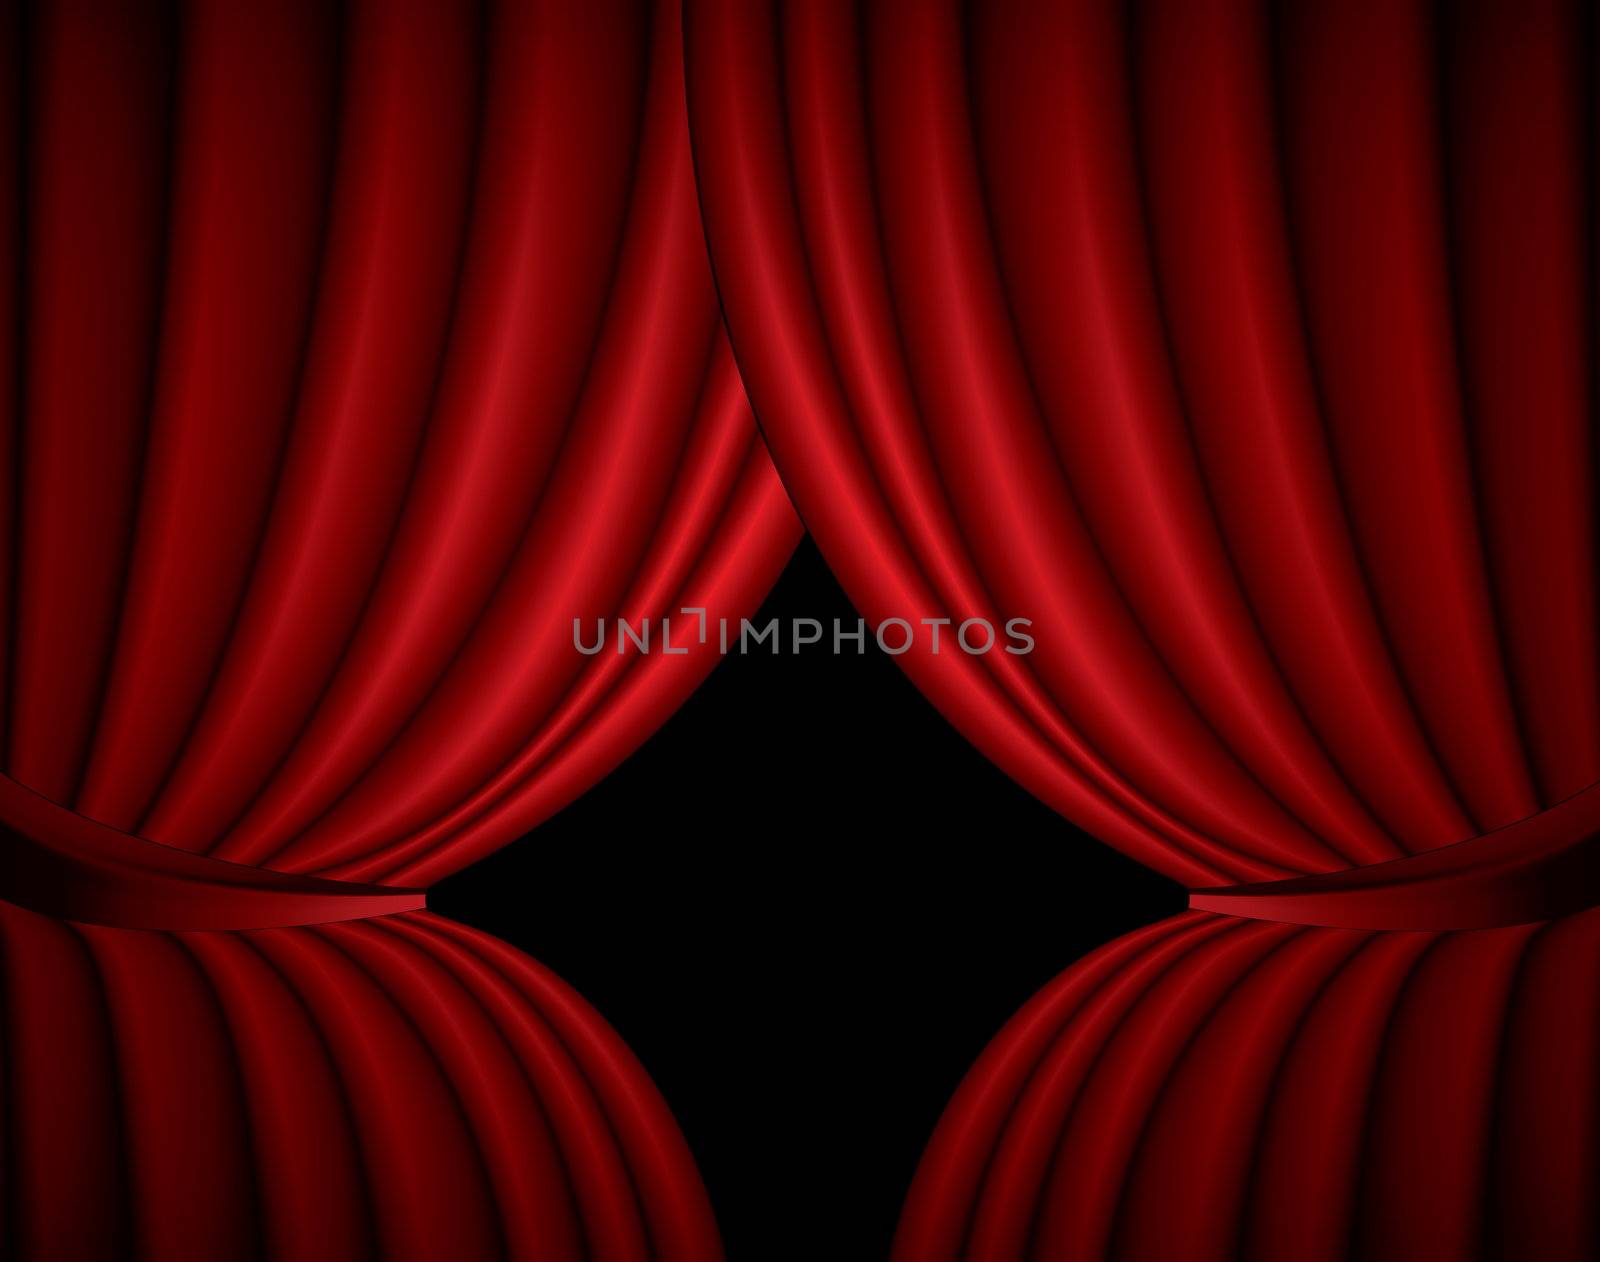 Red theater silk curtain background with wave, illustration by svtrotof